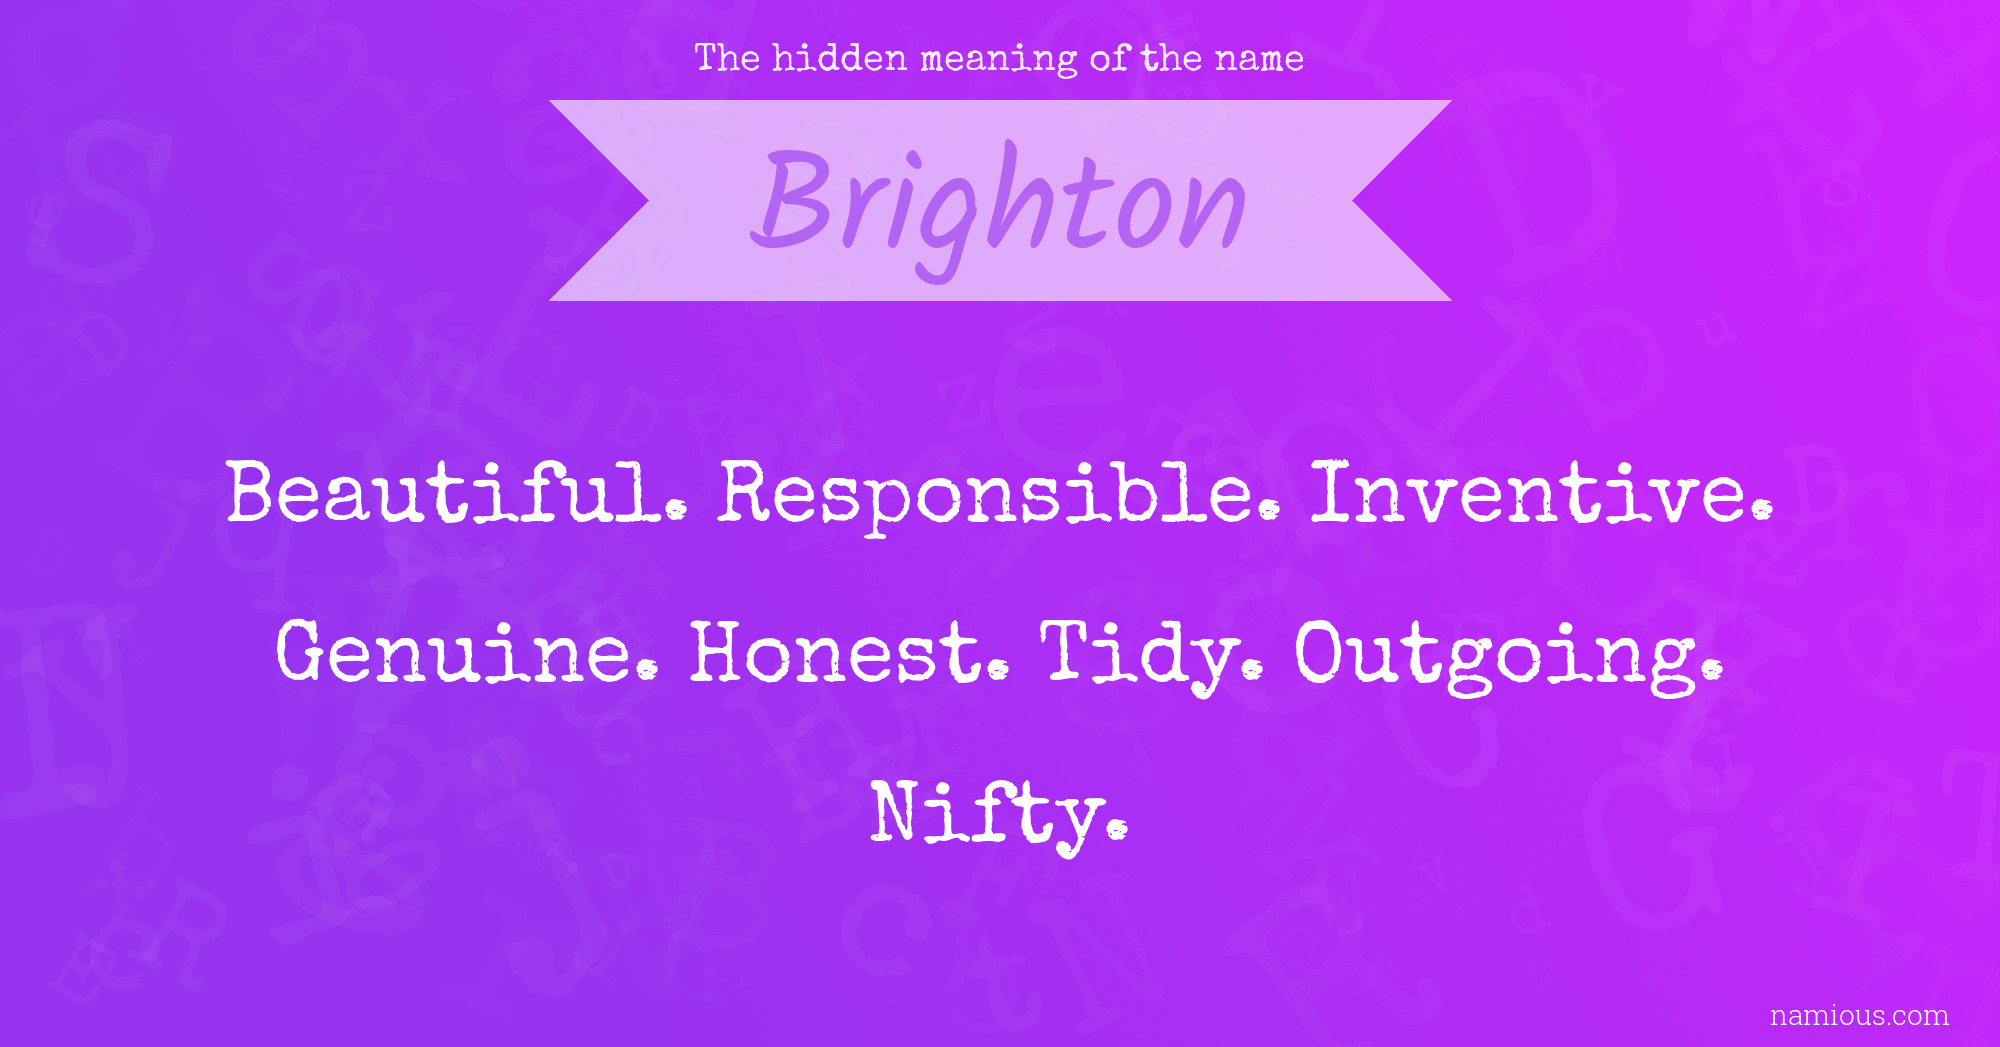 The hidden meaning of the name Brighton